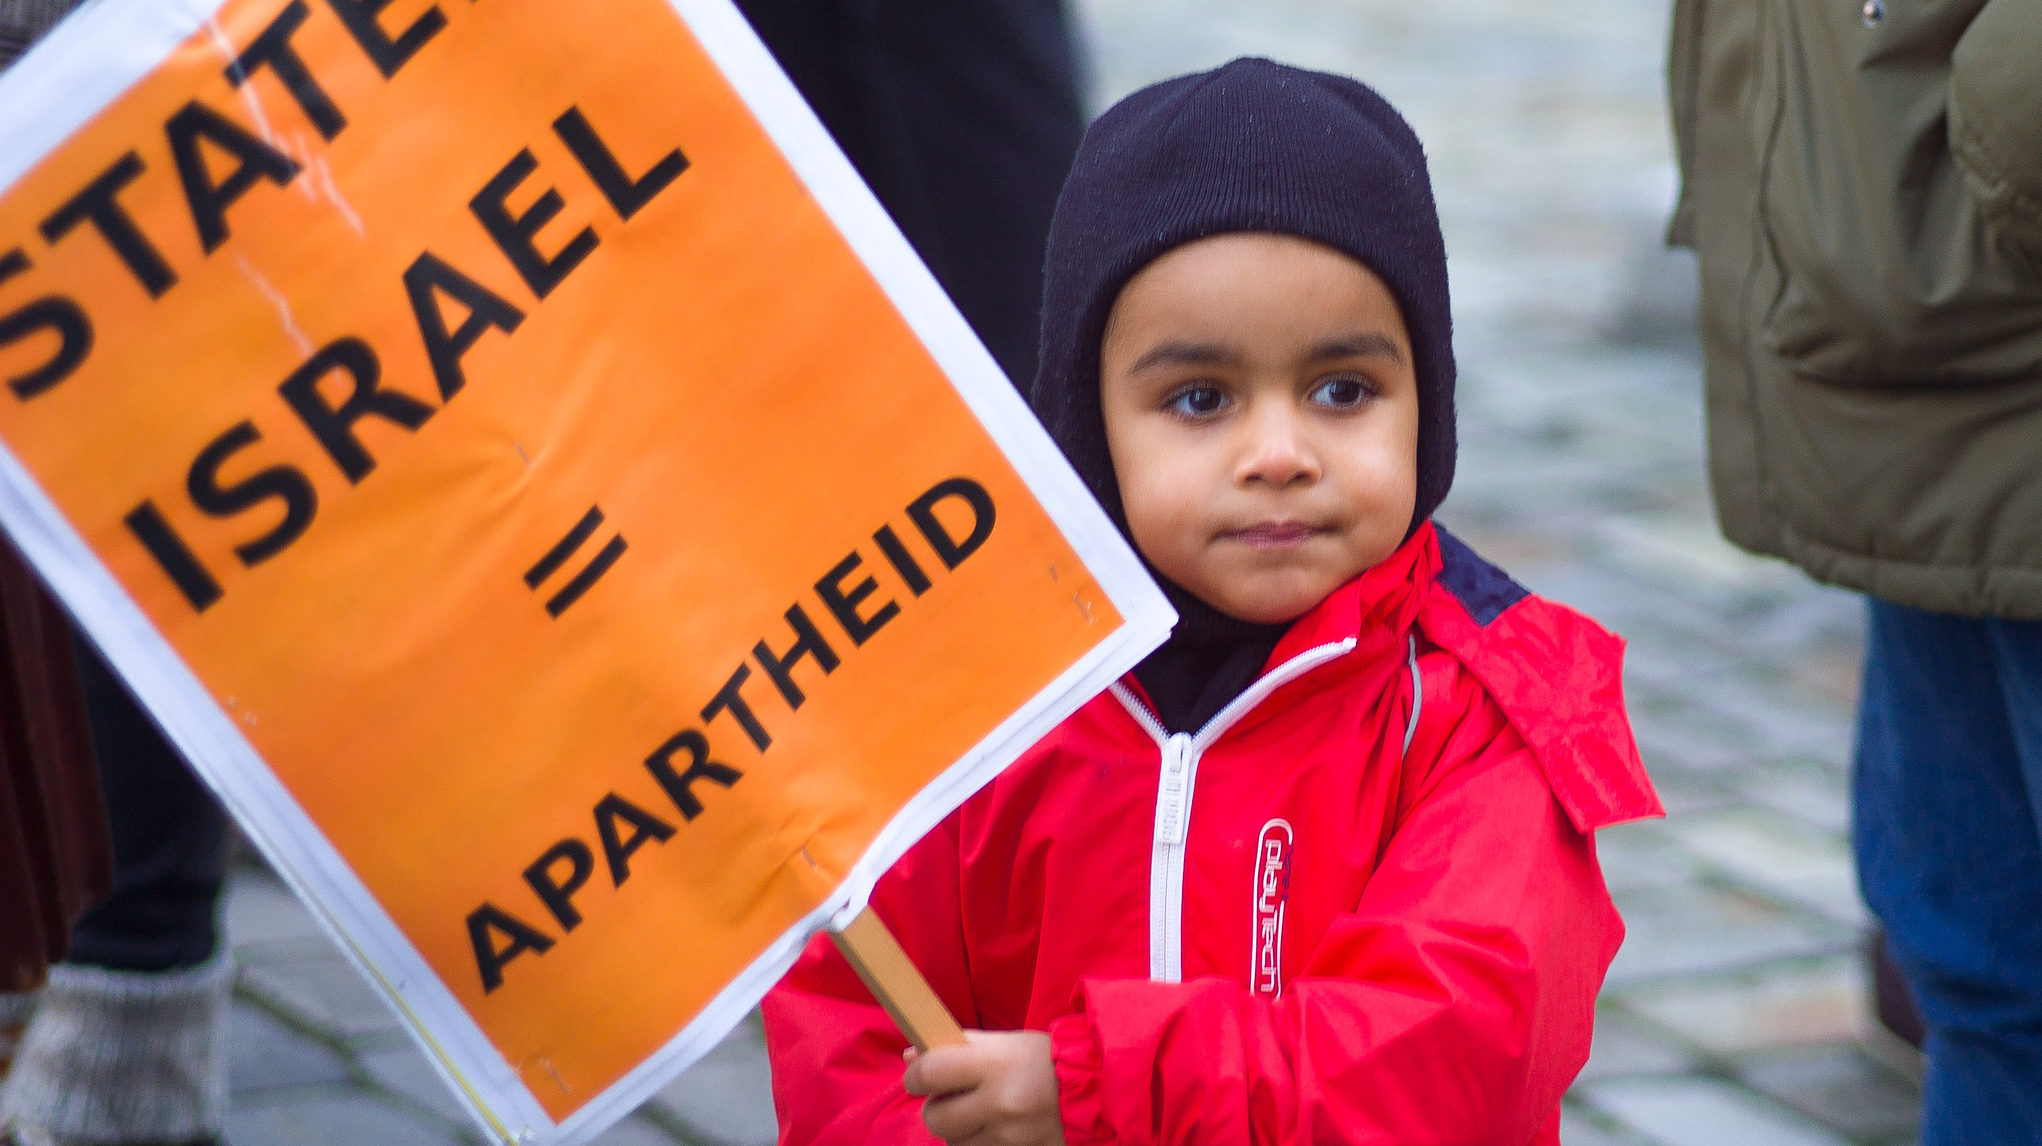 Human Rights Watch Accuses Israel of Apartheid, Crimes Against Humanity